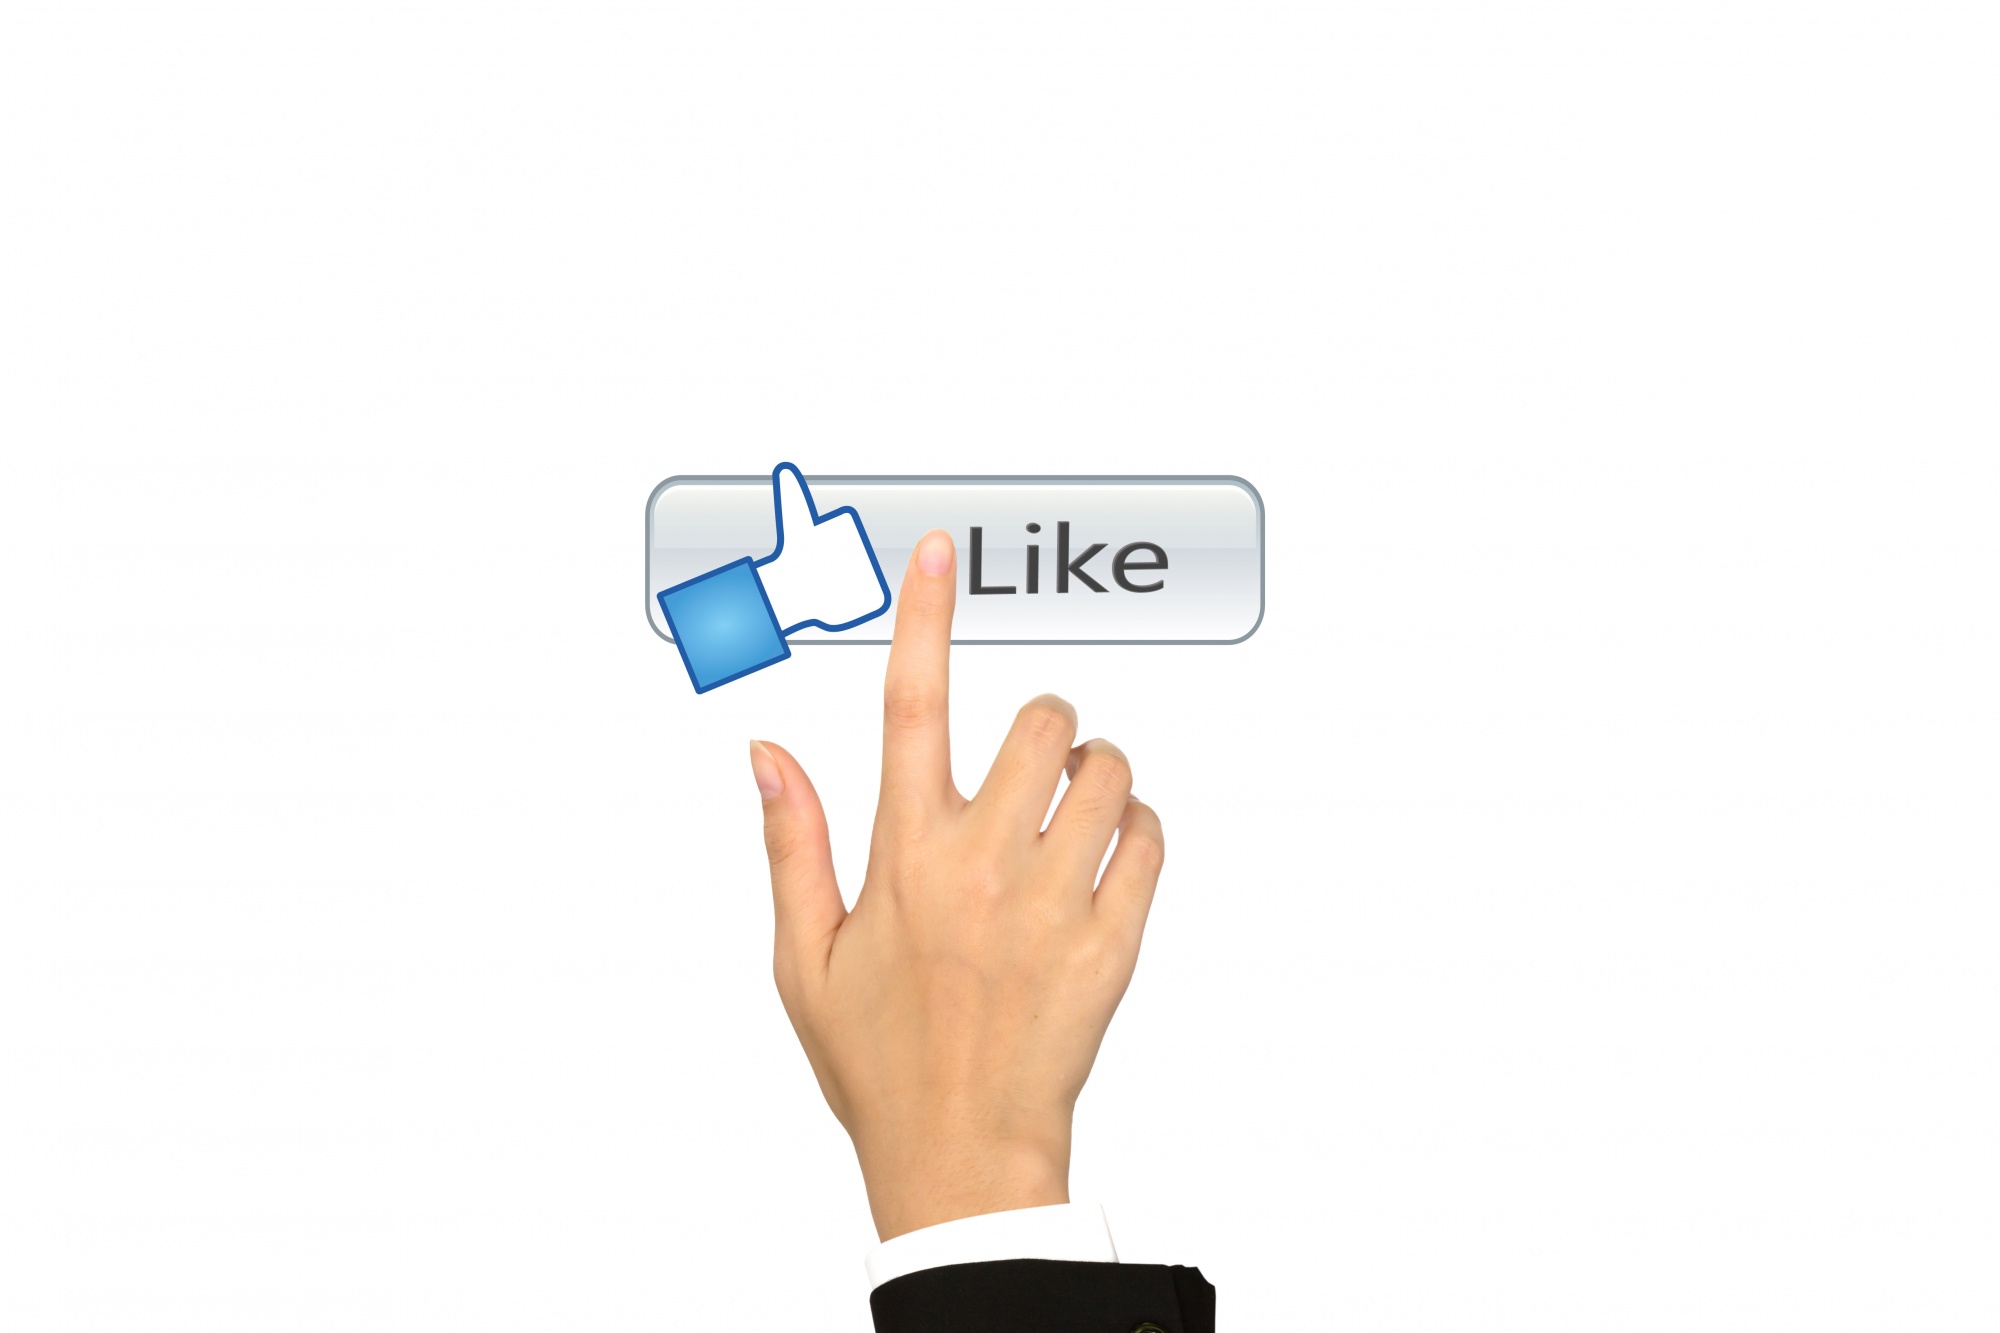 5 Easy Ways to Use WordPress to Get More Facebook Likes